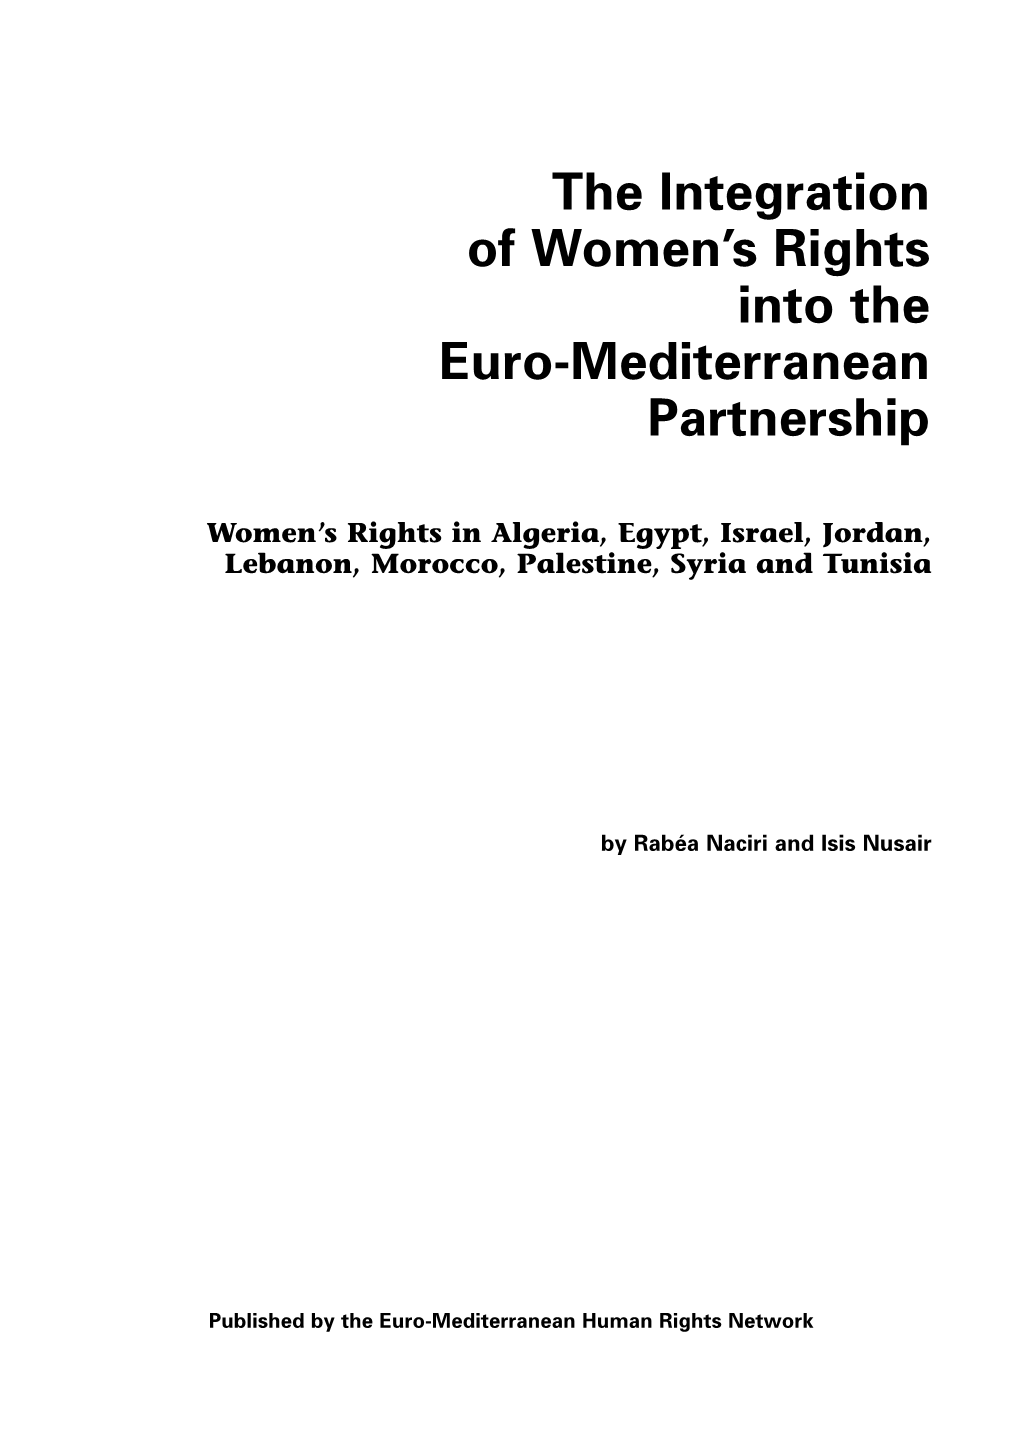 The Integration of Women's Rights Into the Euro-Mediterranean Partnership